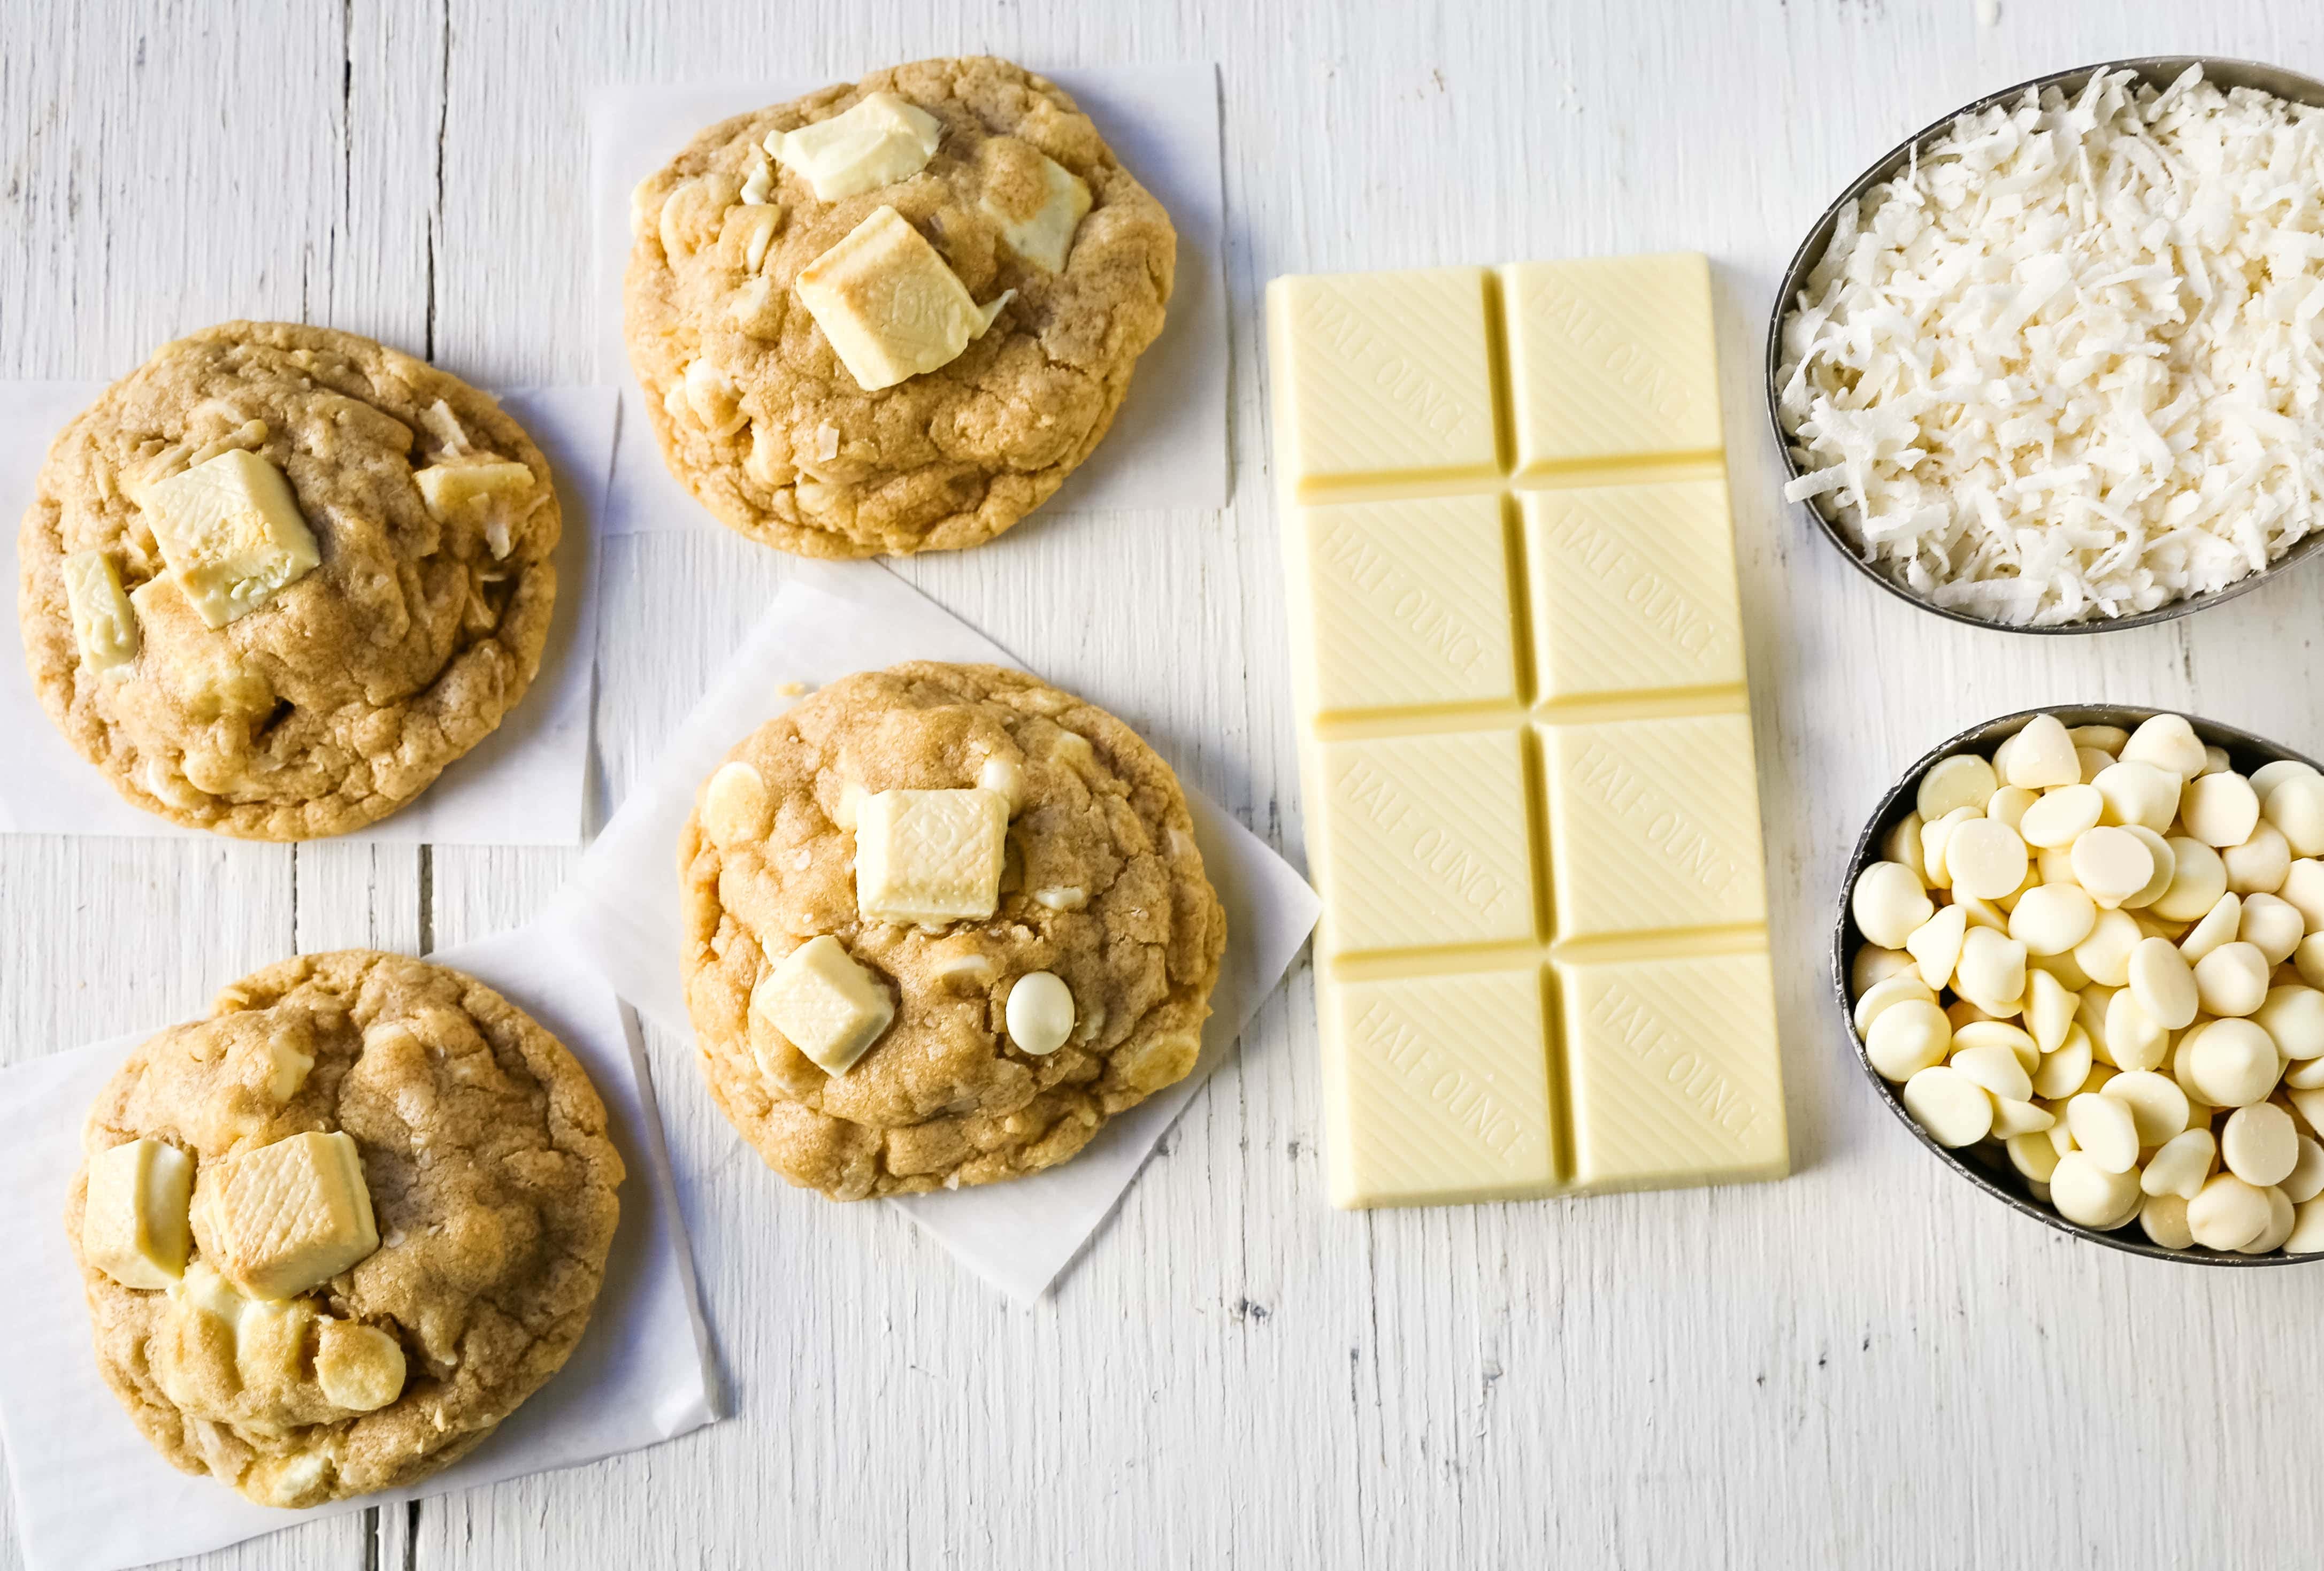 White Chocolate Coconut Cookies Soft chewy white chocolate coconut cookies are the perfect sweet, buttery tropical cookie! www.modernhoney.com #cookie #cookies #cookierecipe #cookierecipes #whitechocolatecookies